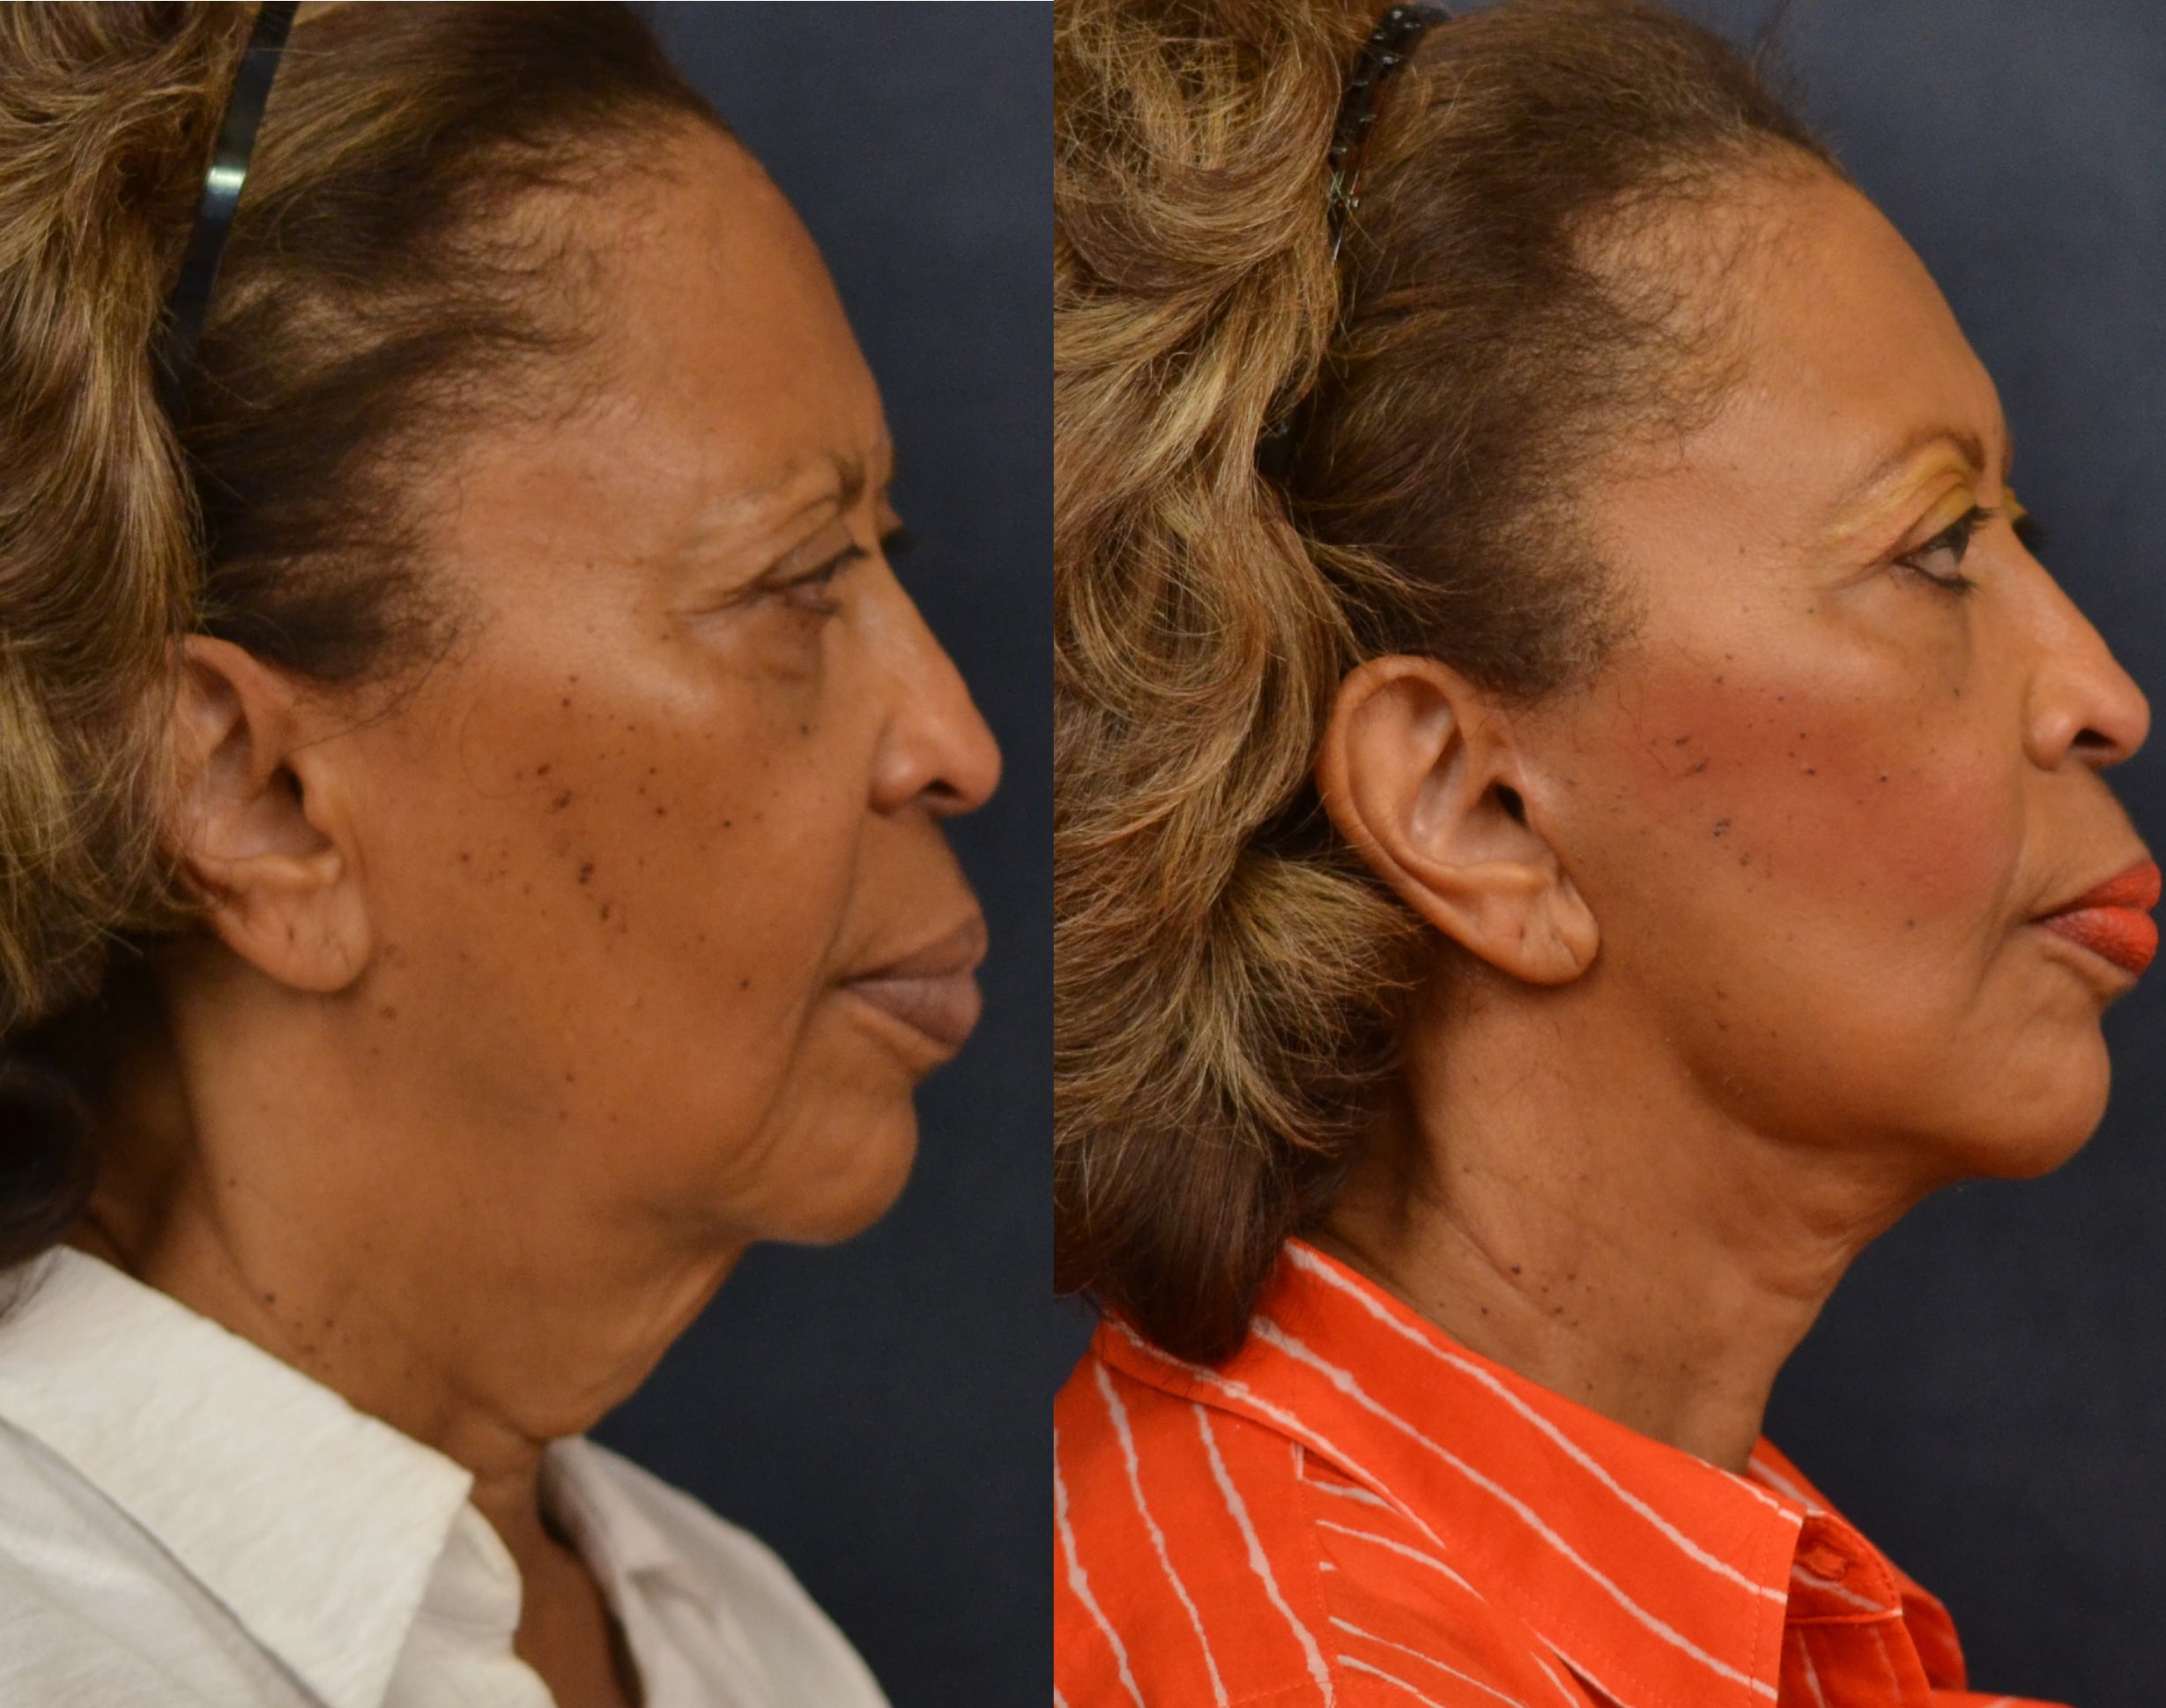 Lower Facelift before and after